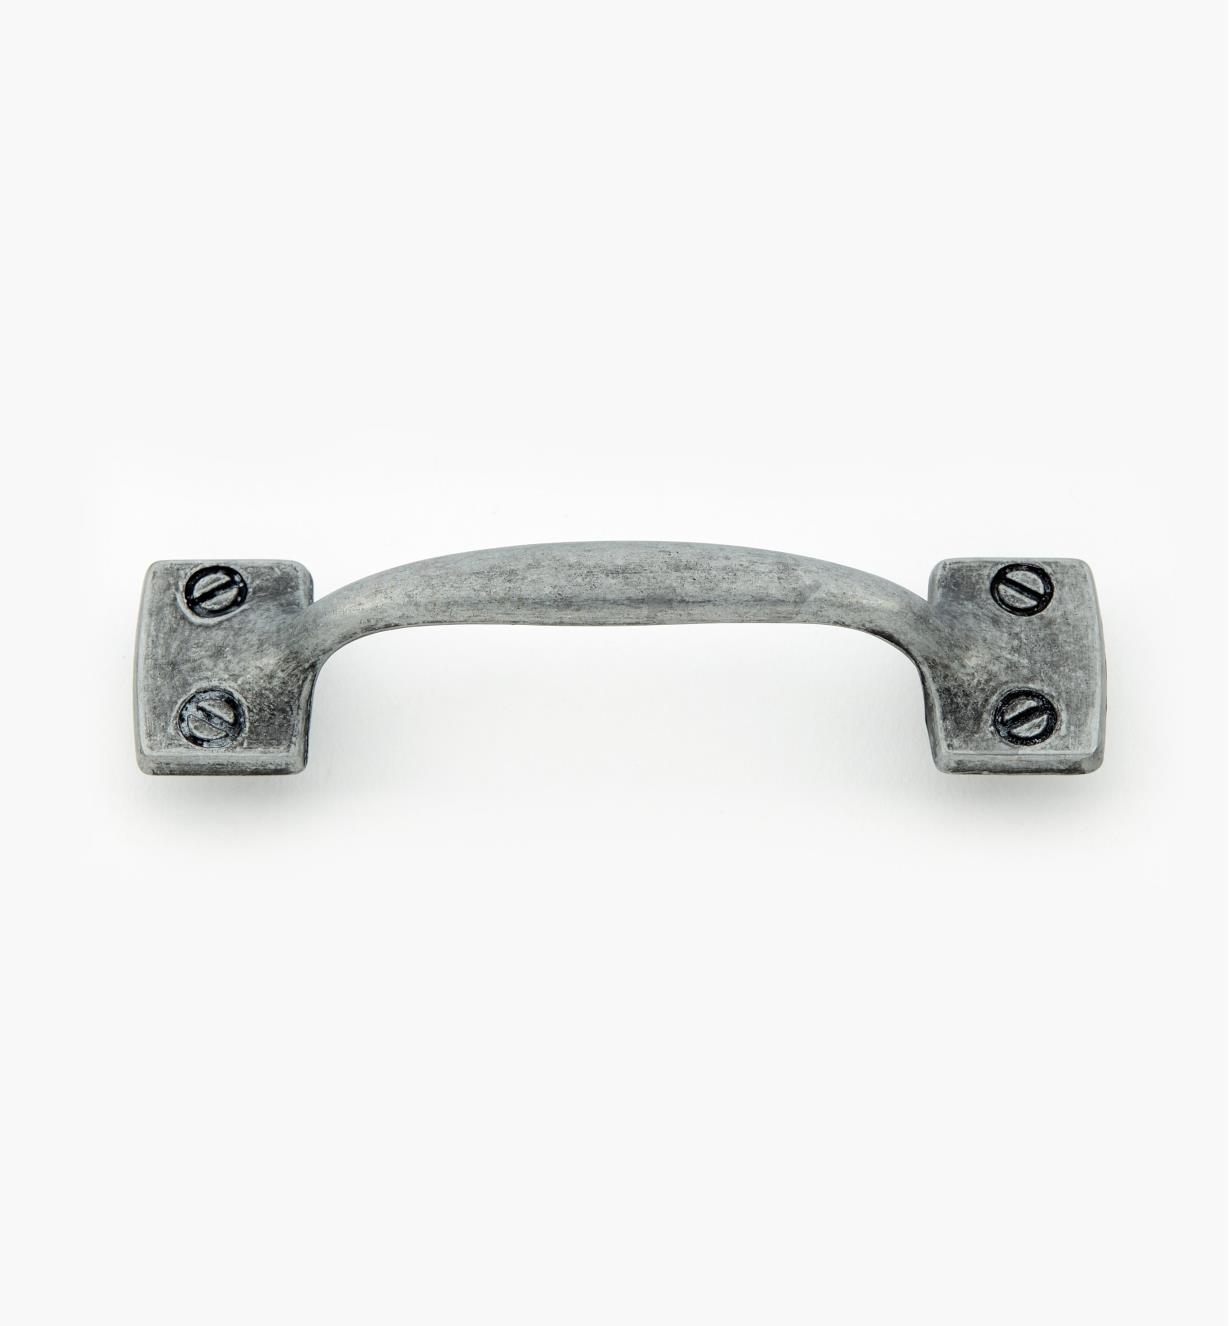 01W3613 - 4" Pewter Handle